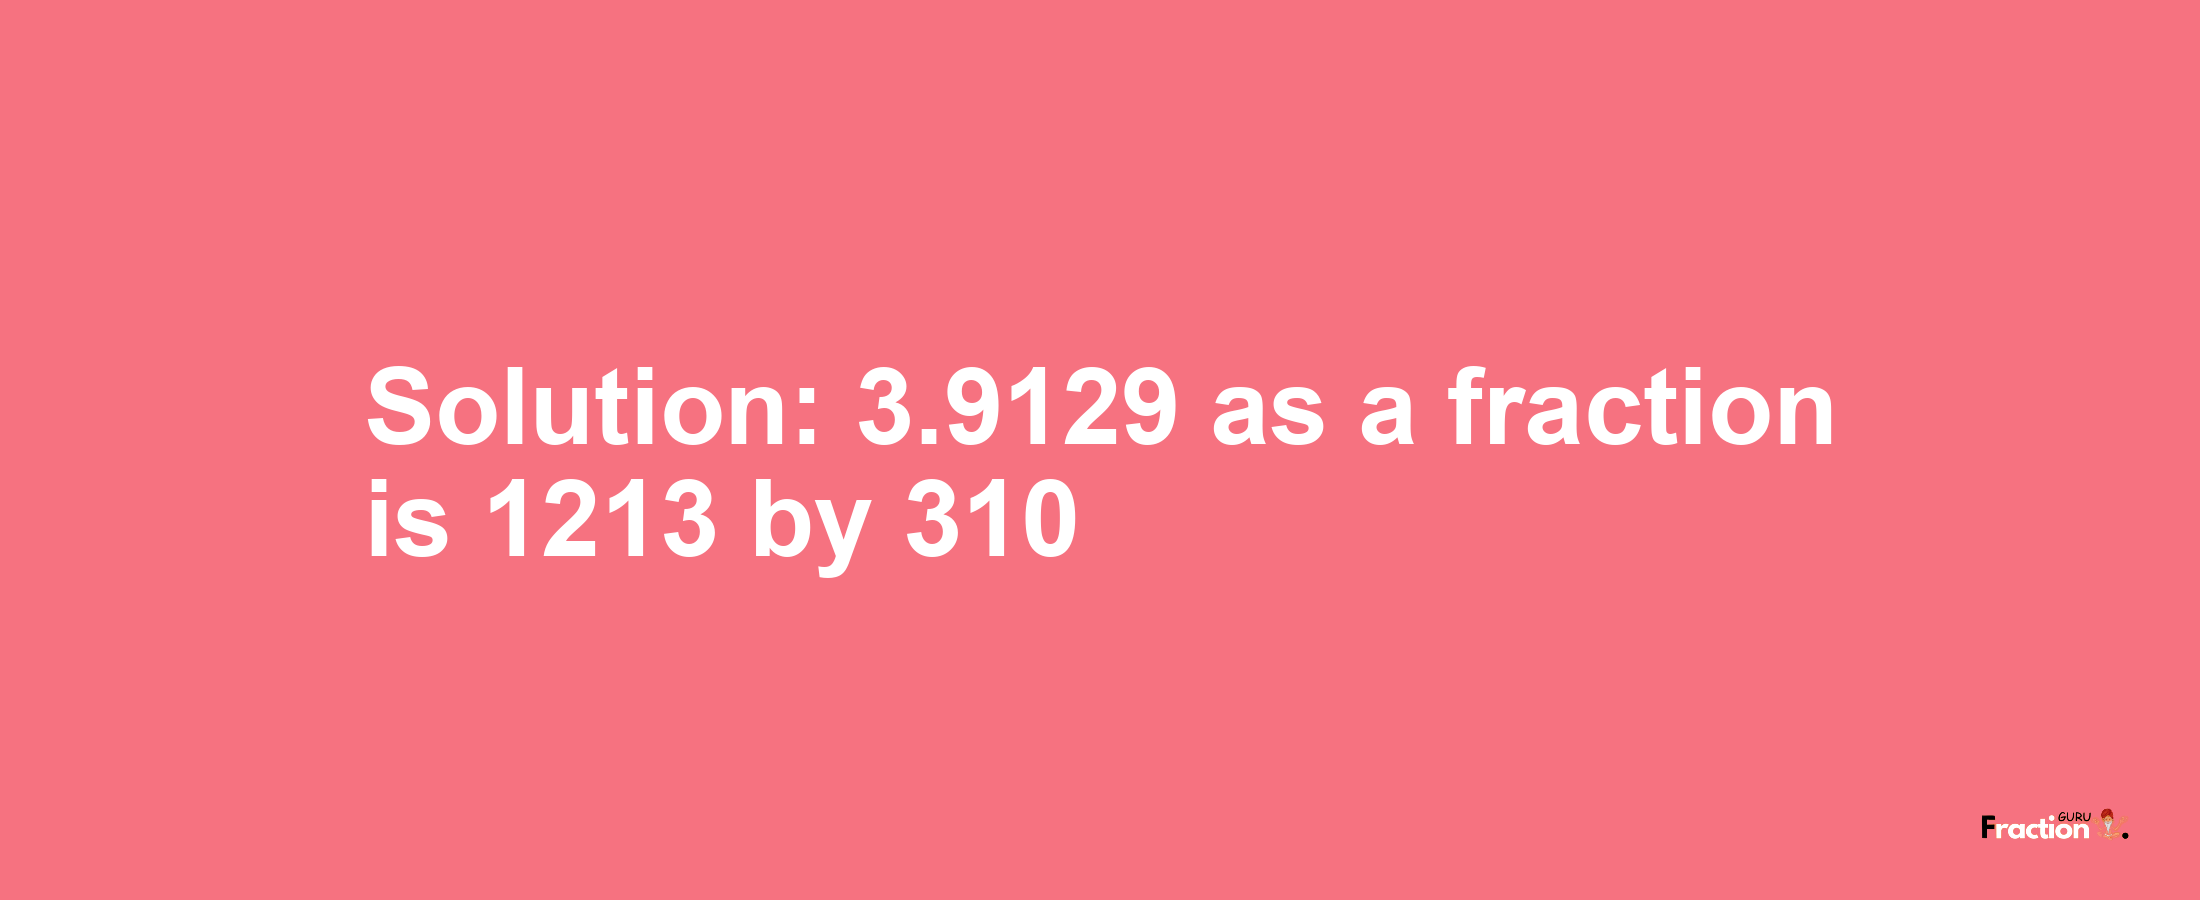 Solution:3.9129 as a fraction is 1213/310